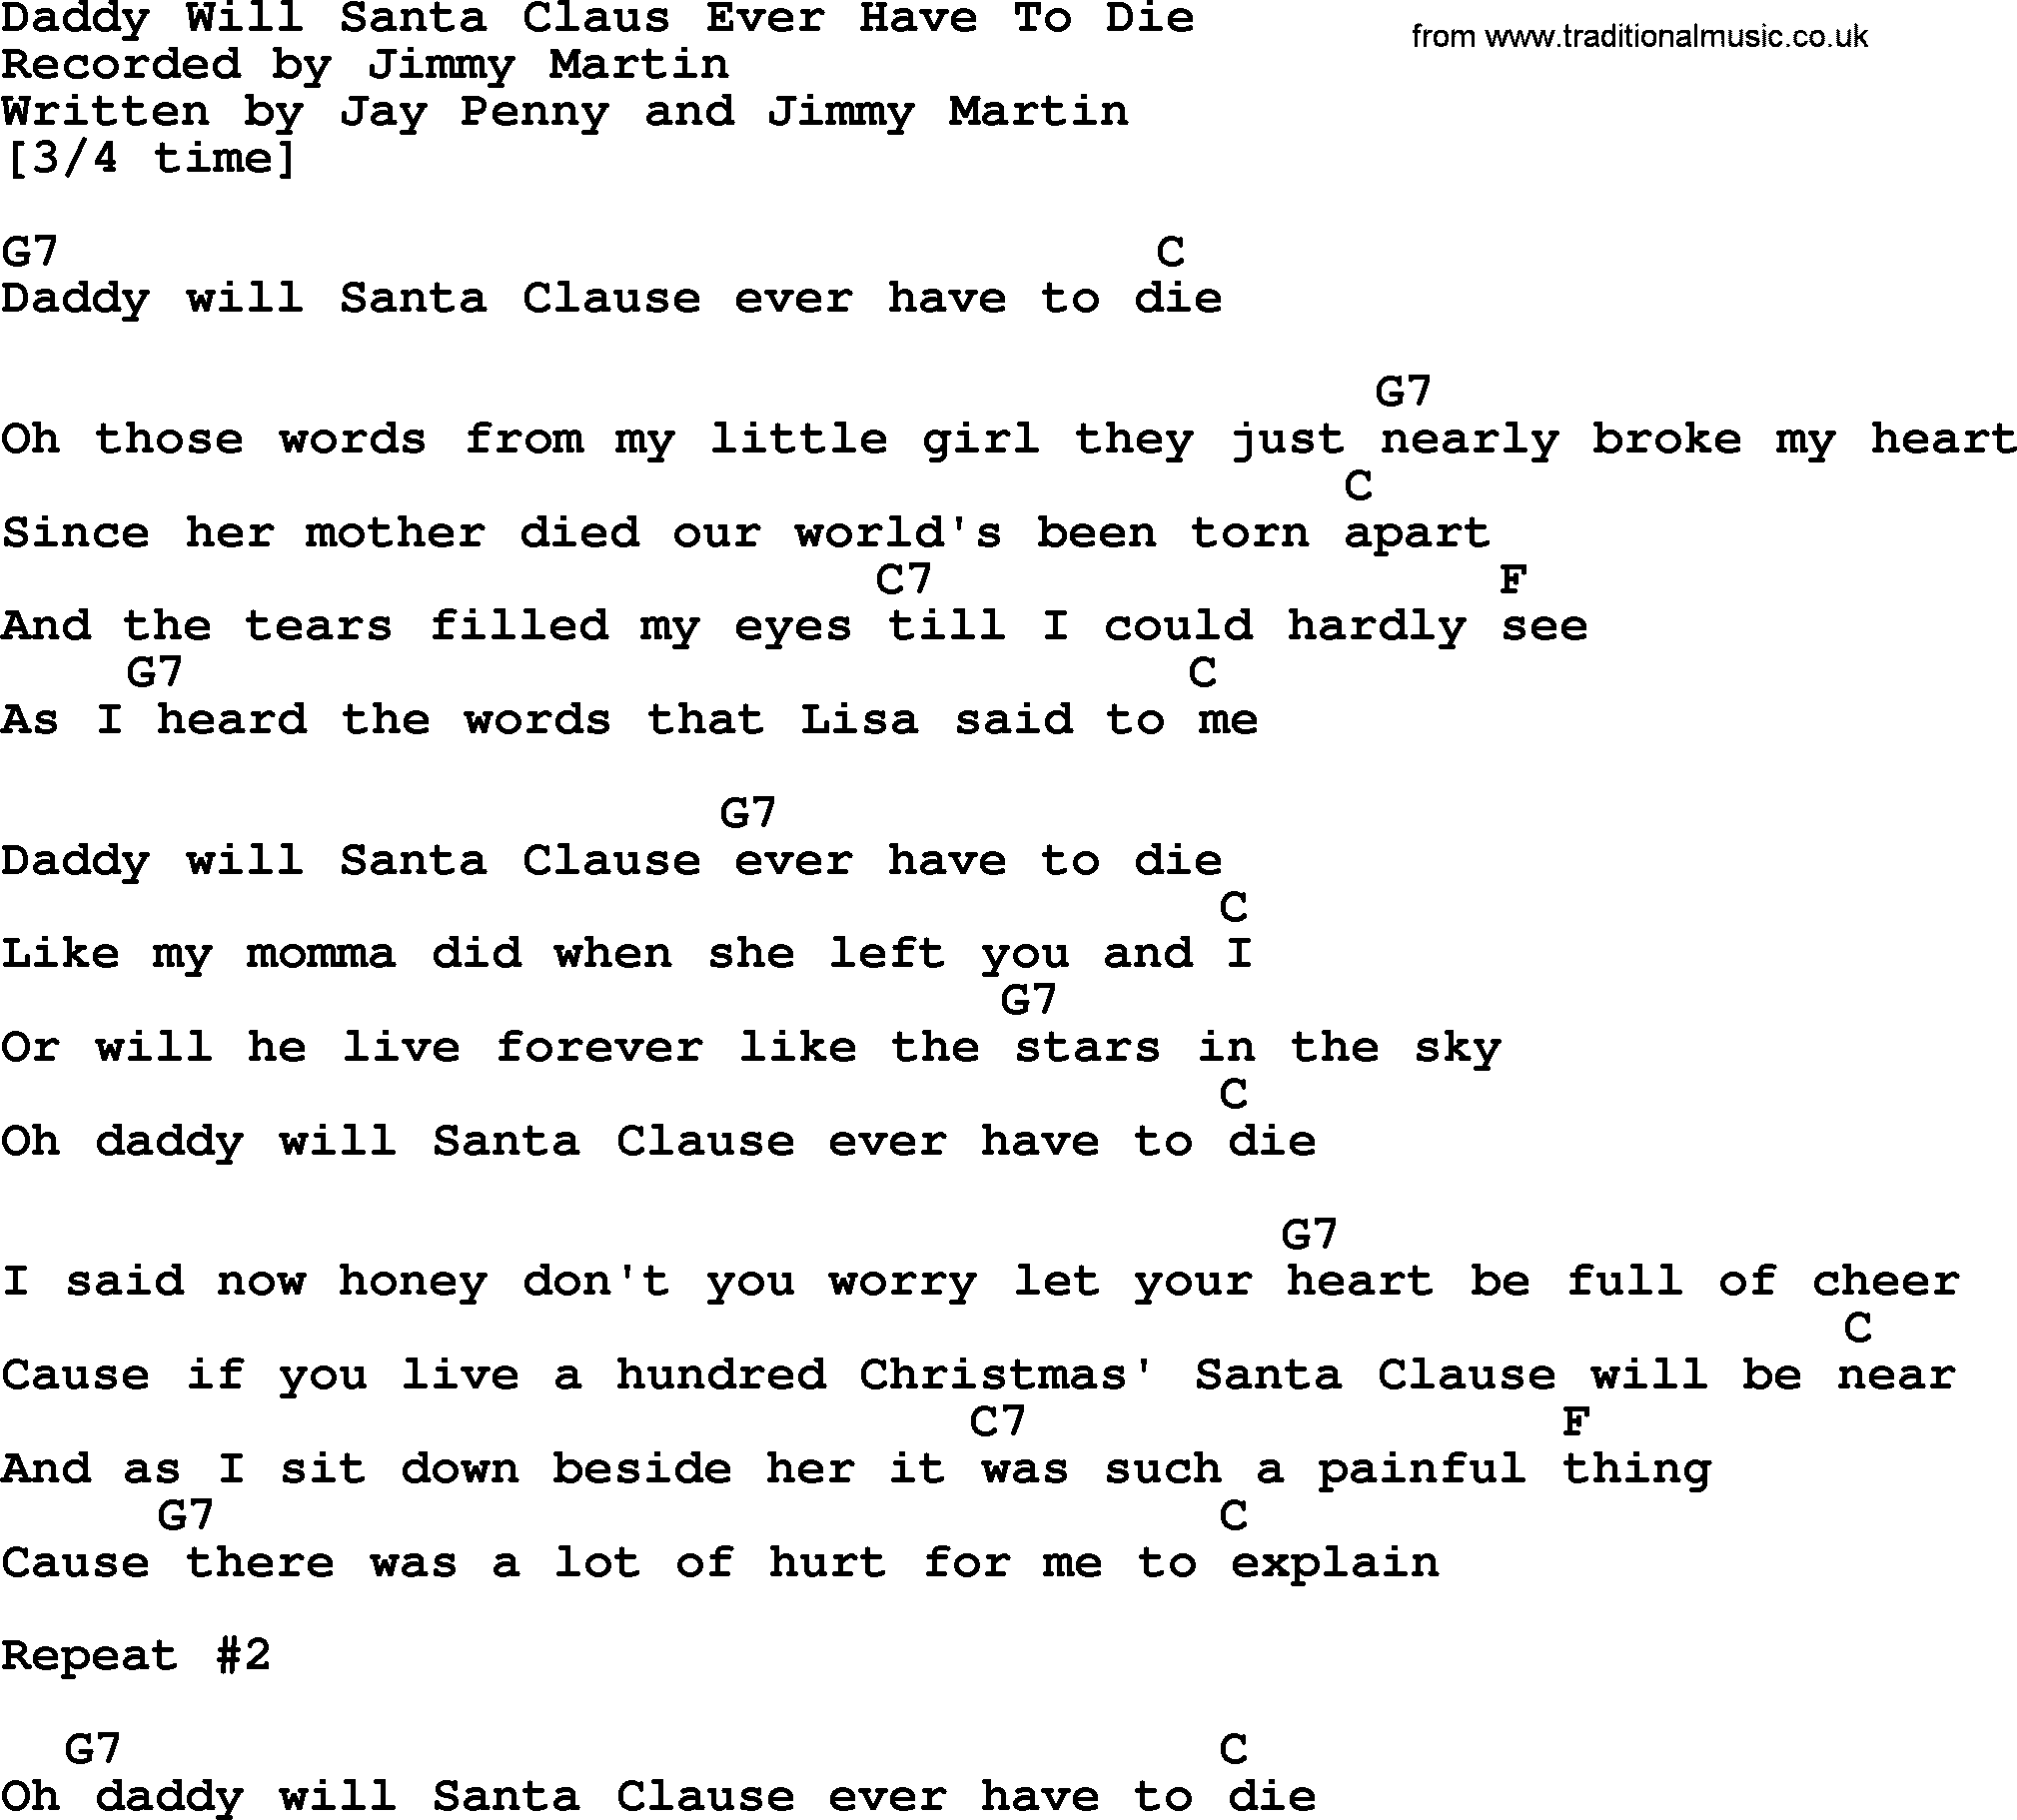 Bluegrass song: Daddy Will Santa Claus Ever Have To Die, lyrics and chords